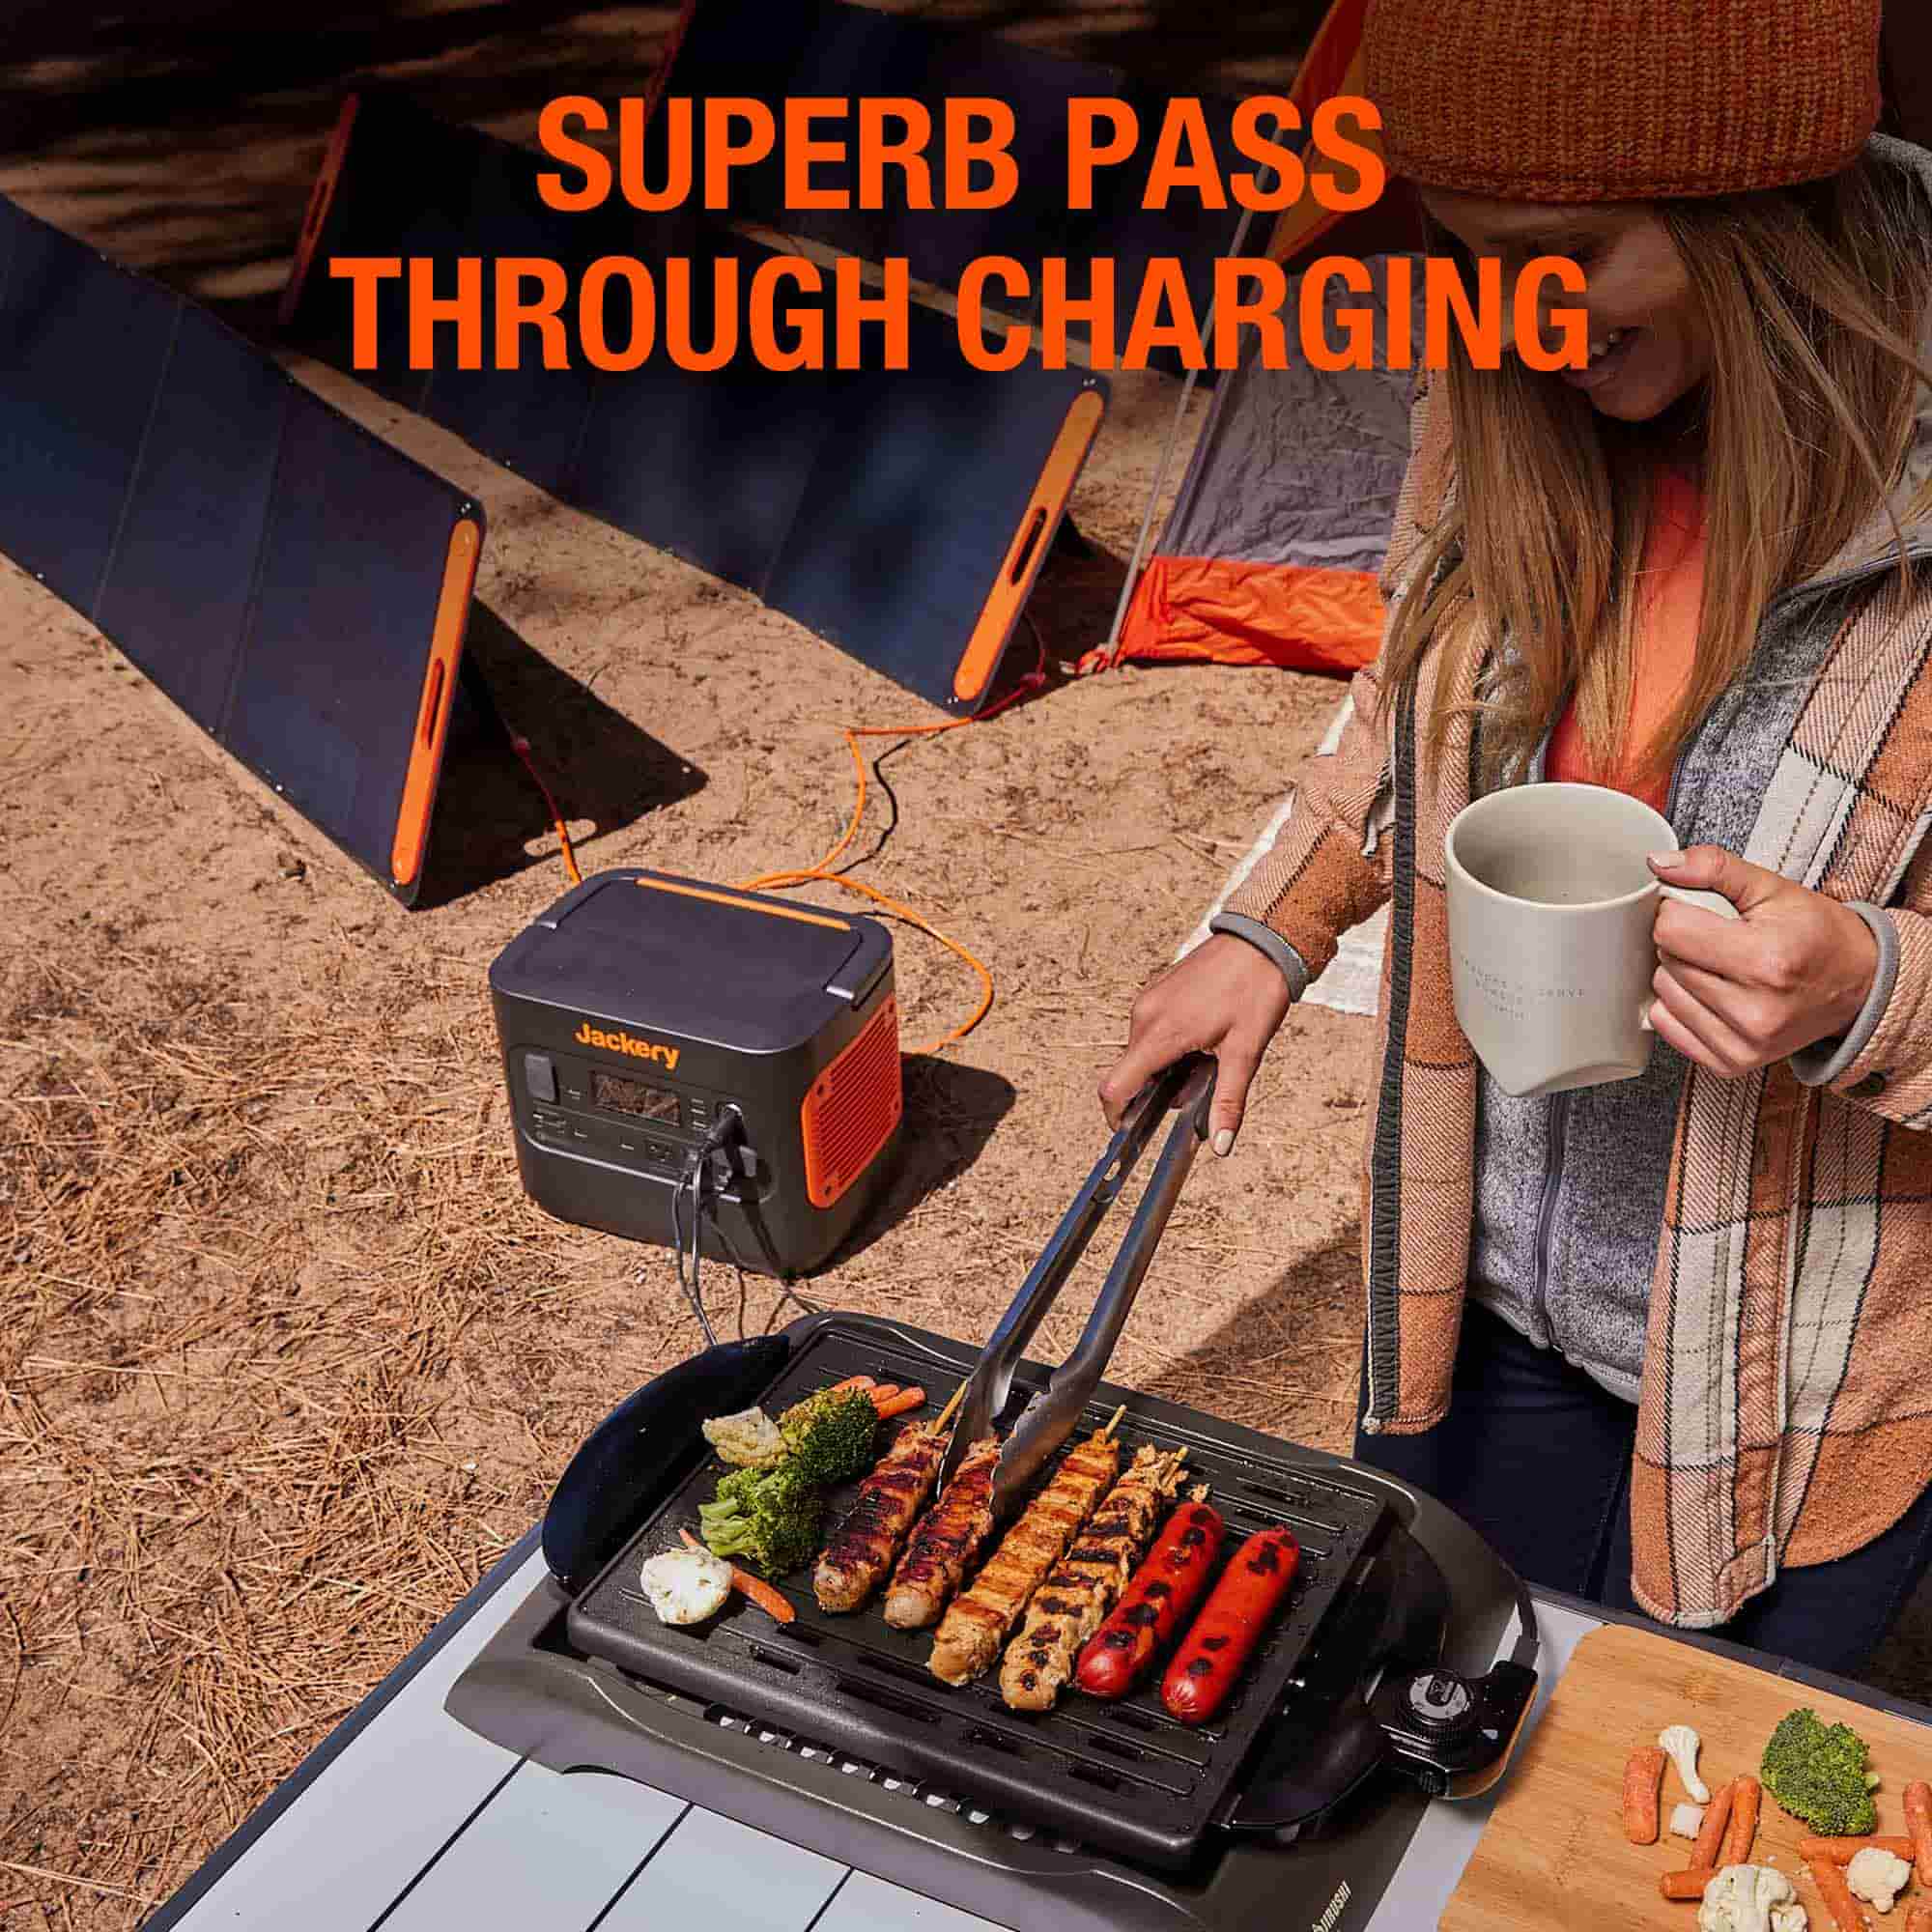 Jackery Solar Generator 2000 Pro With Superb Charging Through Features